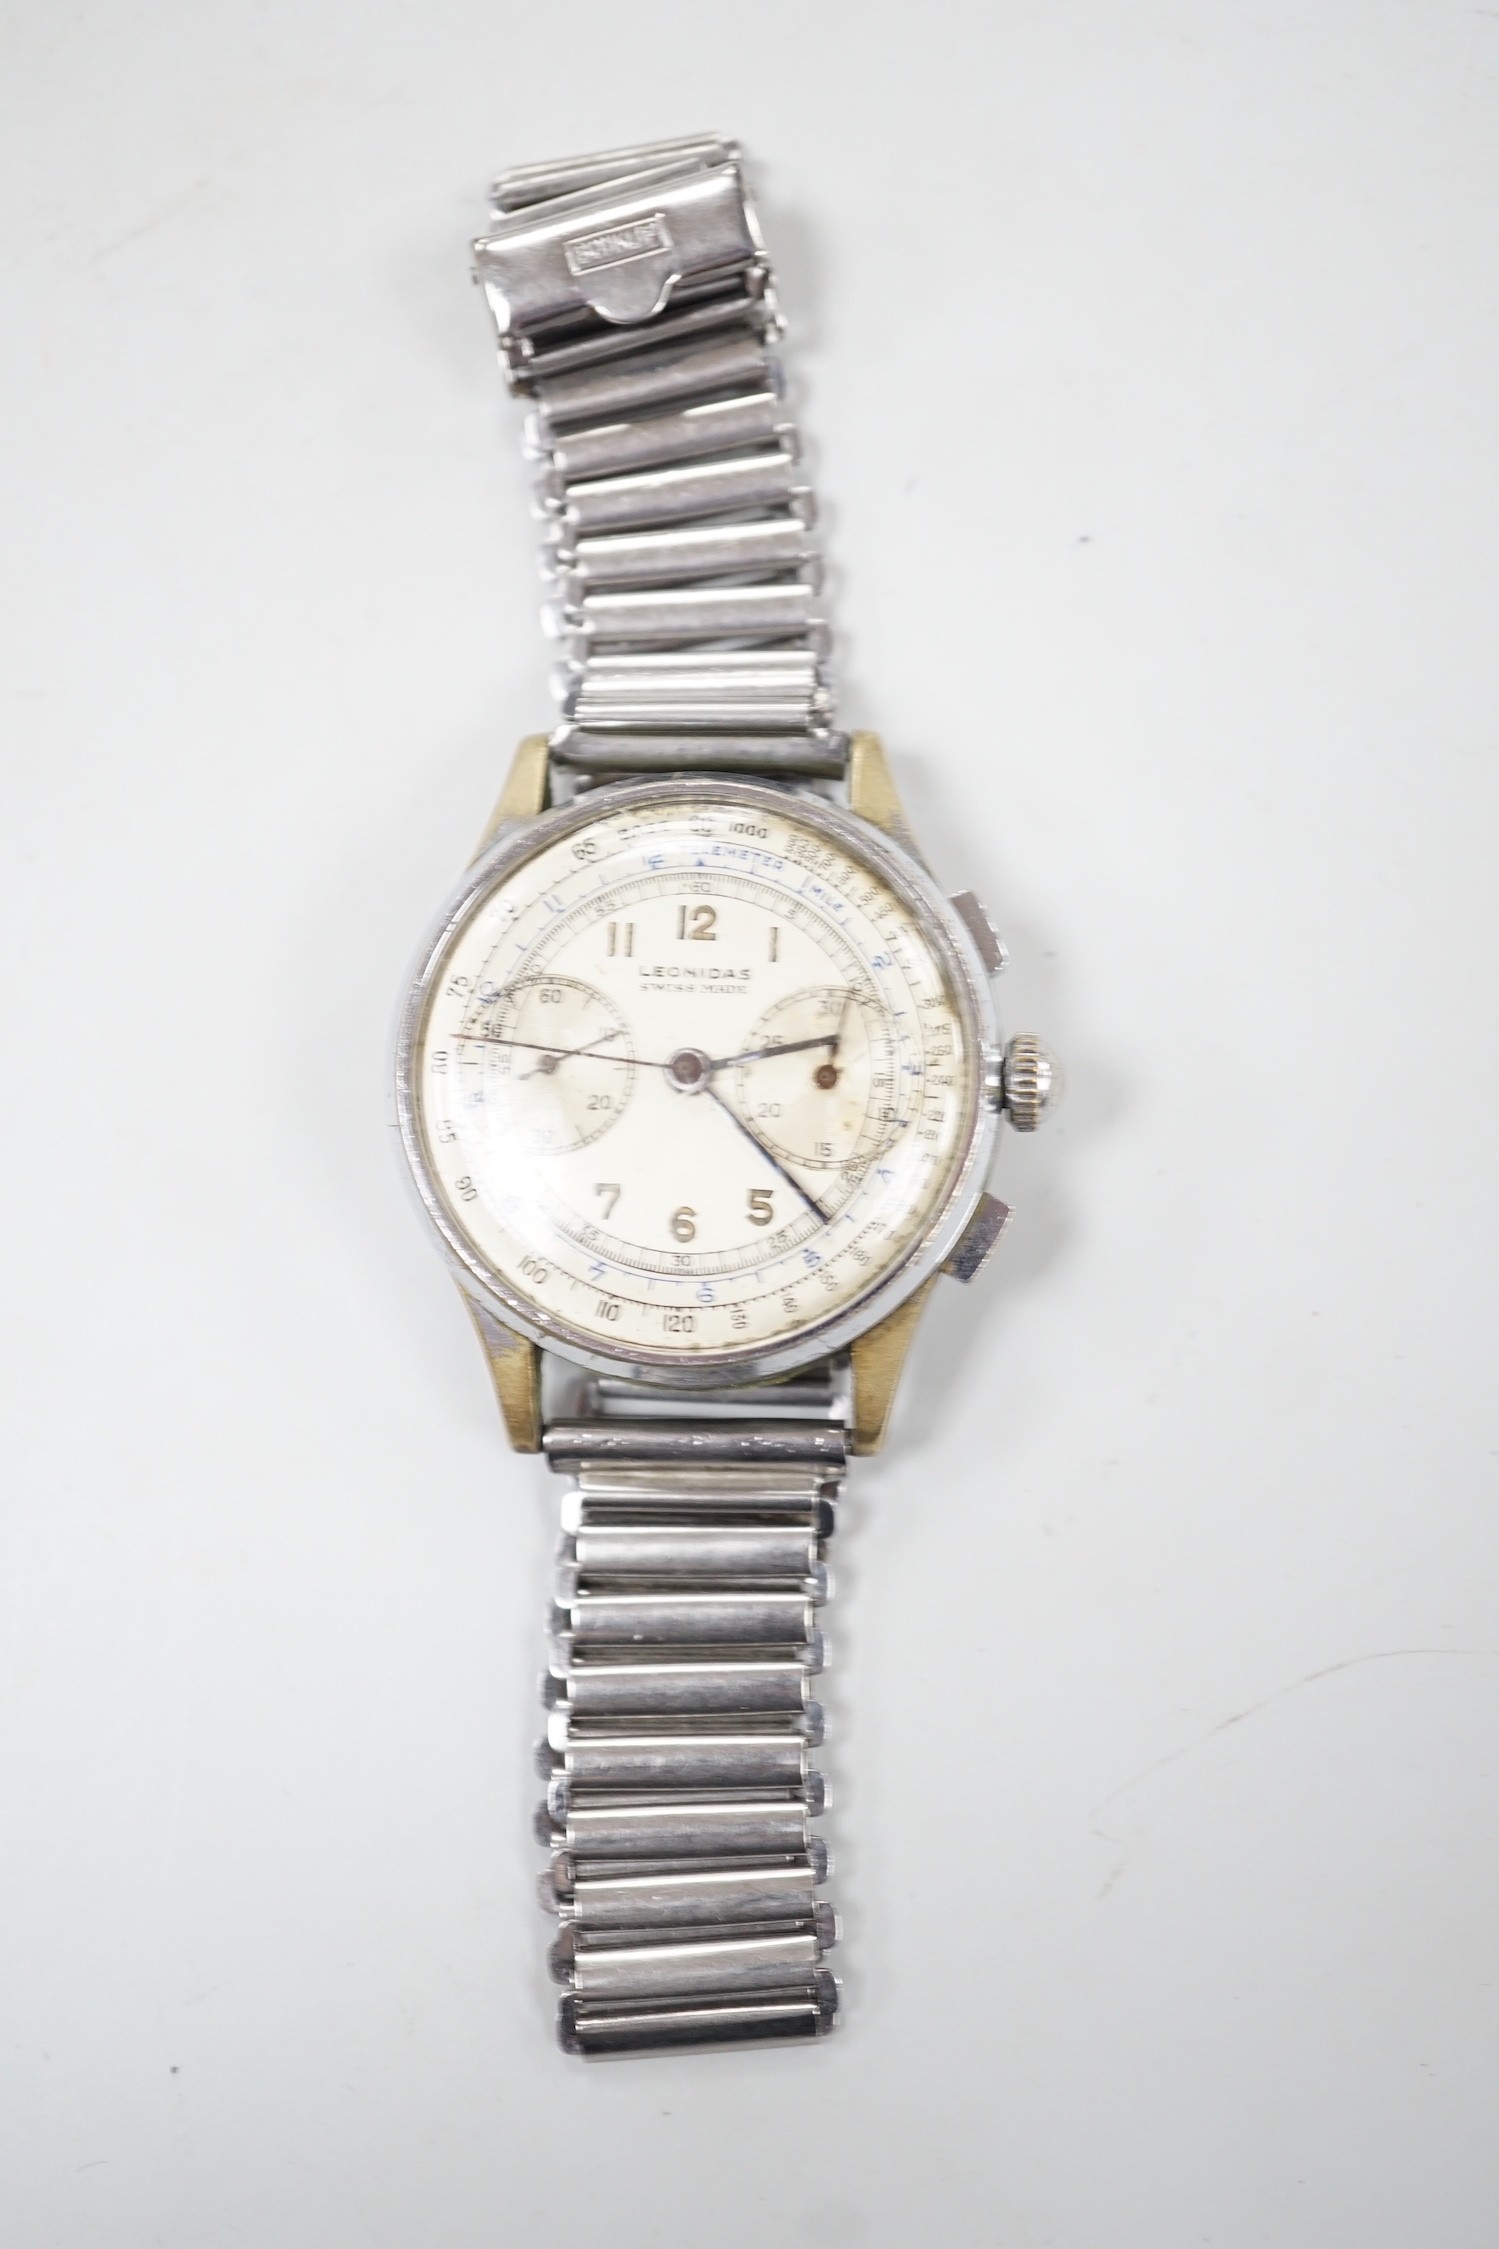 A gentleman's 1950's? stainless steel Leonidas chronograph manual wind wrist watch, case diameter 35mm, on a stainless steel bracelet